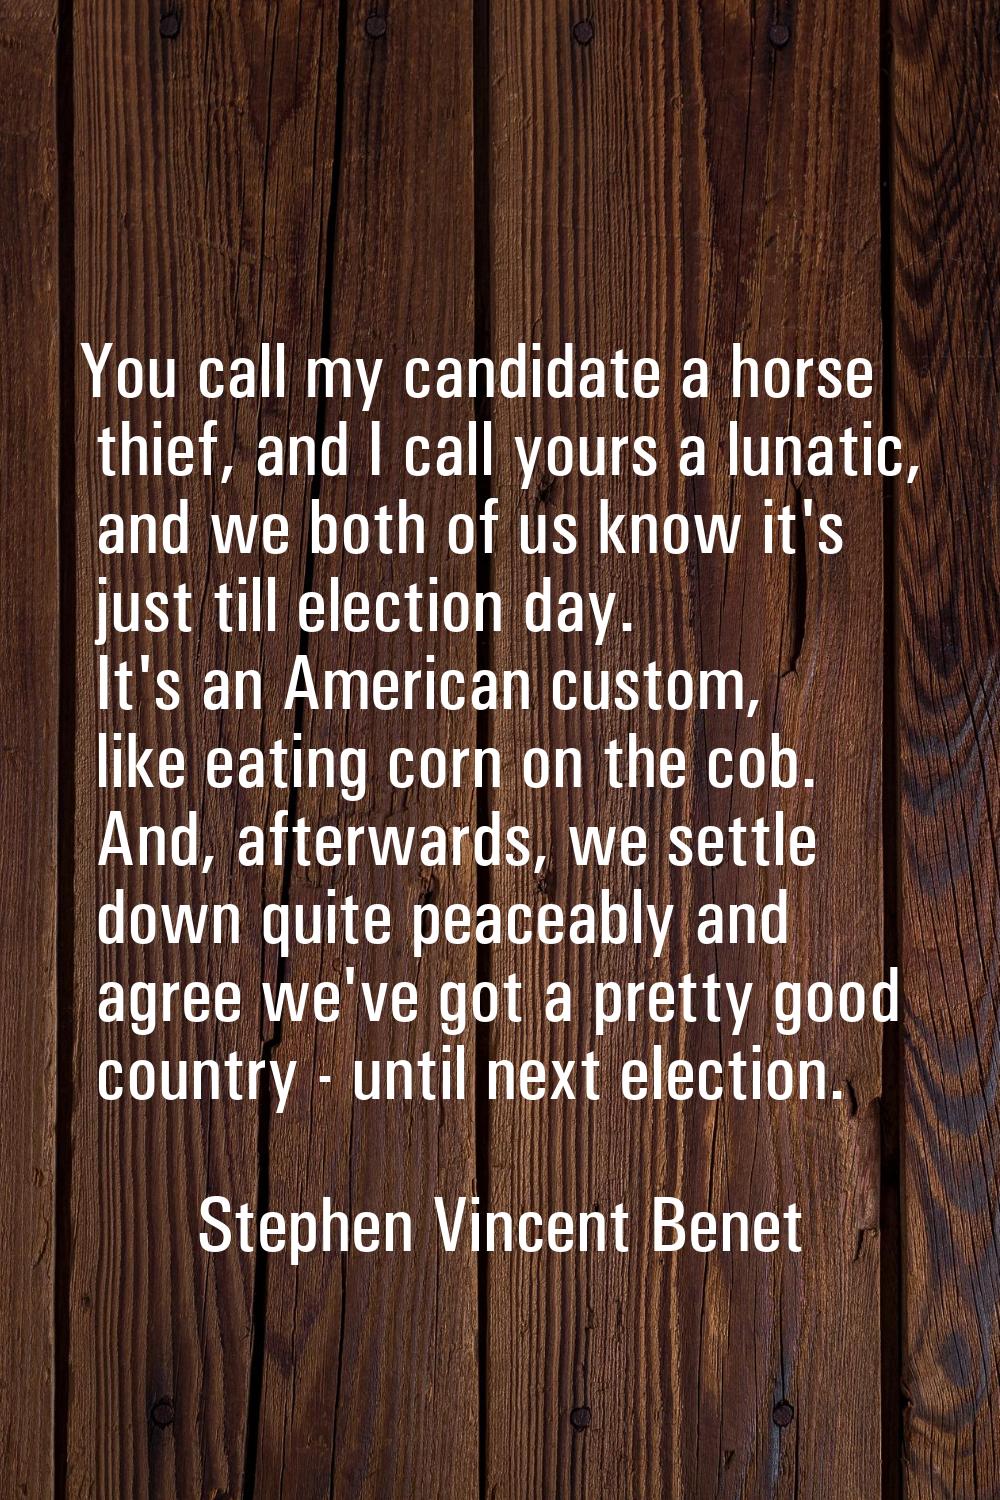 You call my candidate a horse thief, and I call yours a lunatic, and we both of us know it's just t